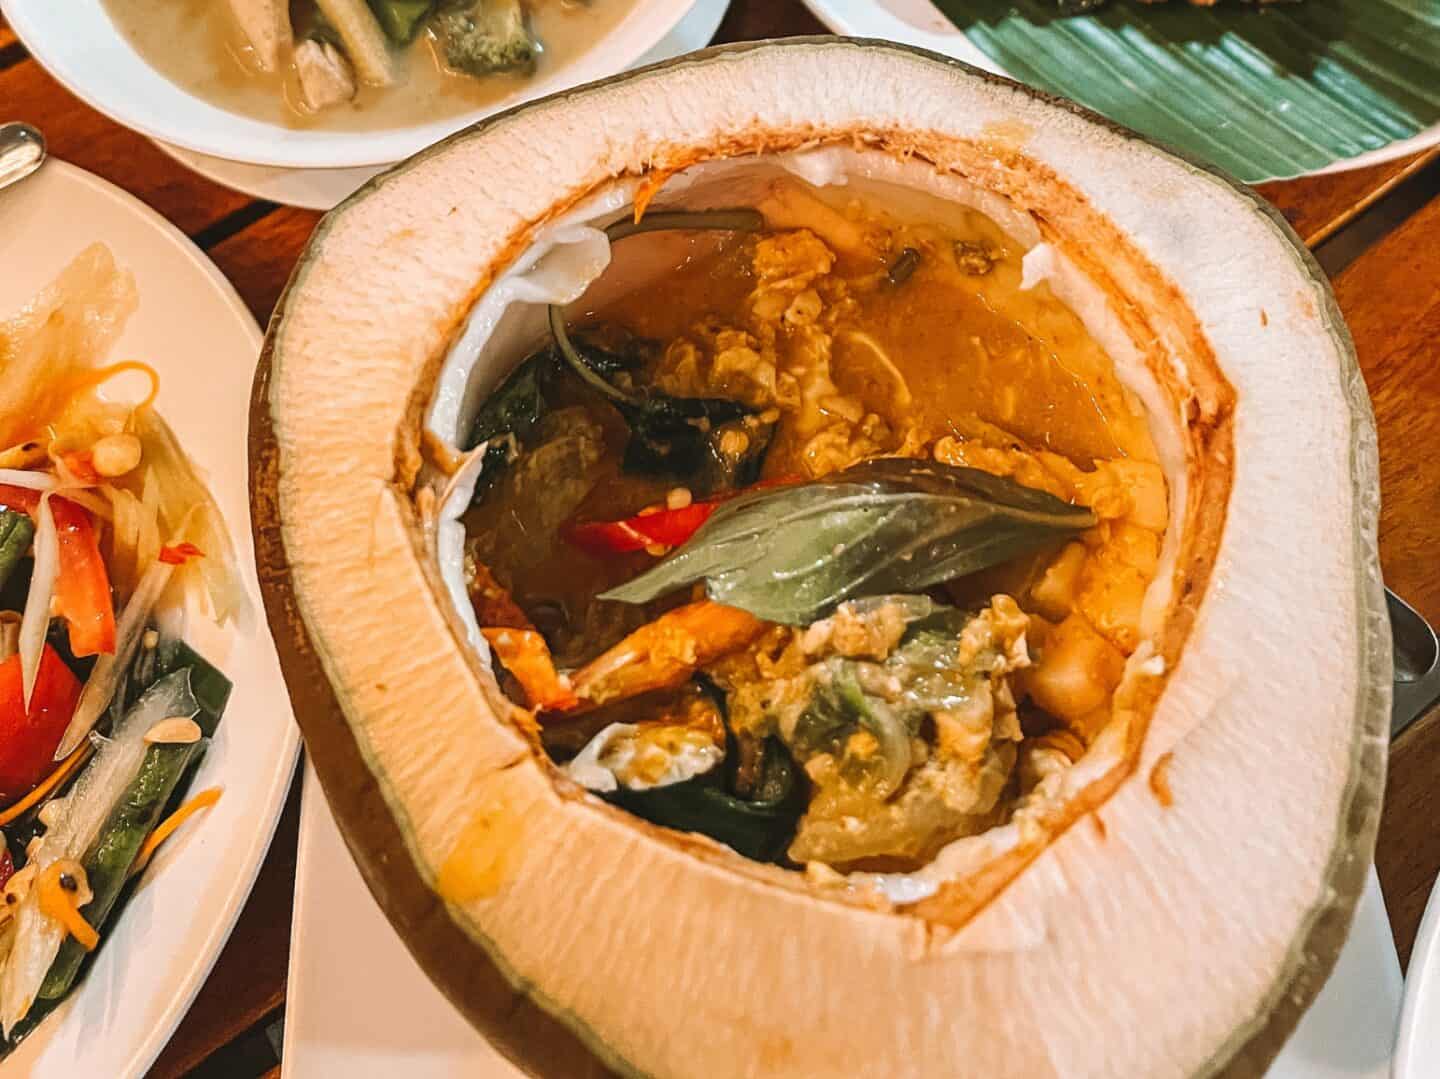 Hor mok ma prow awn, or seafood curry, served in a fresh coconut in Krabi Thailand